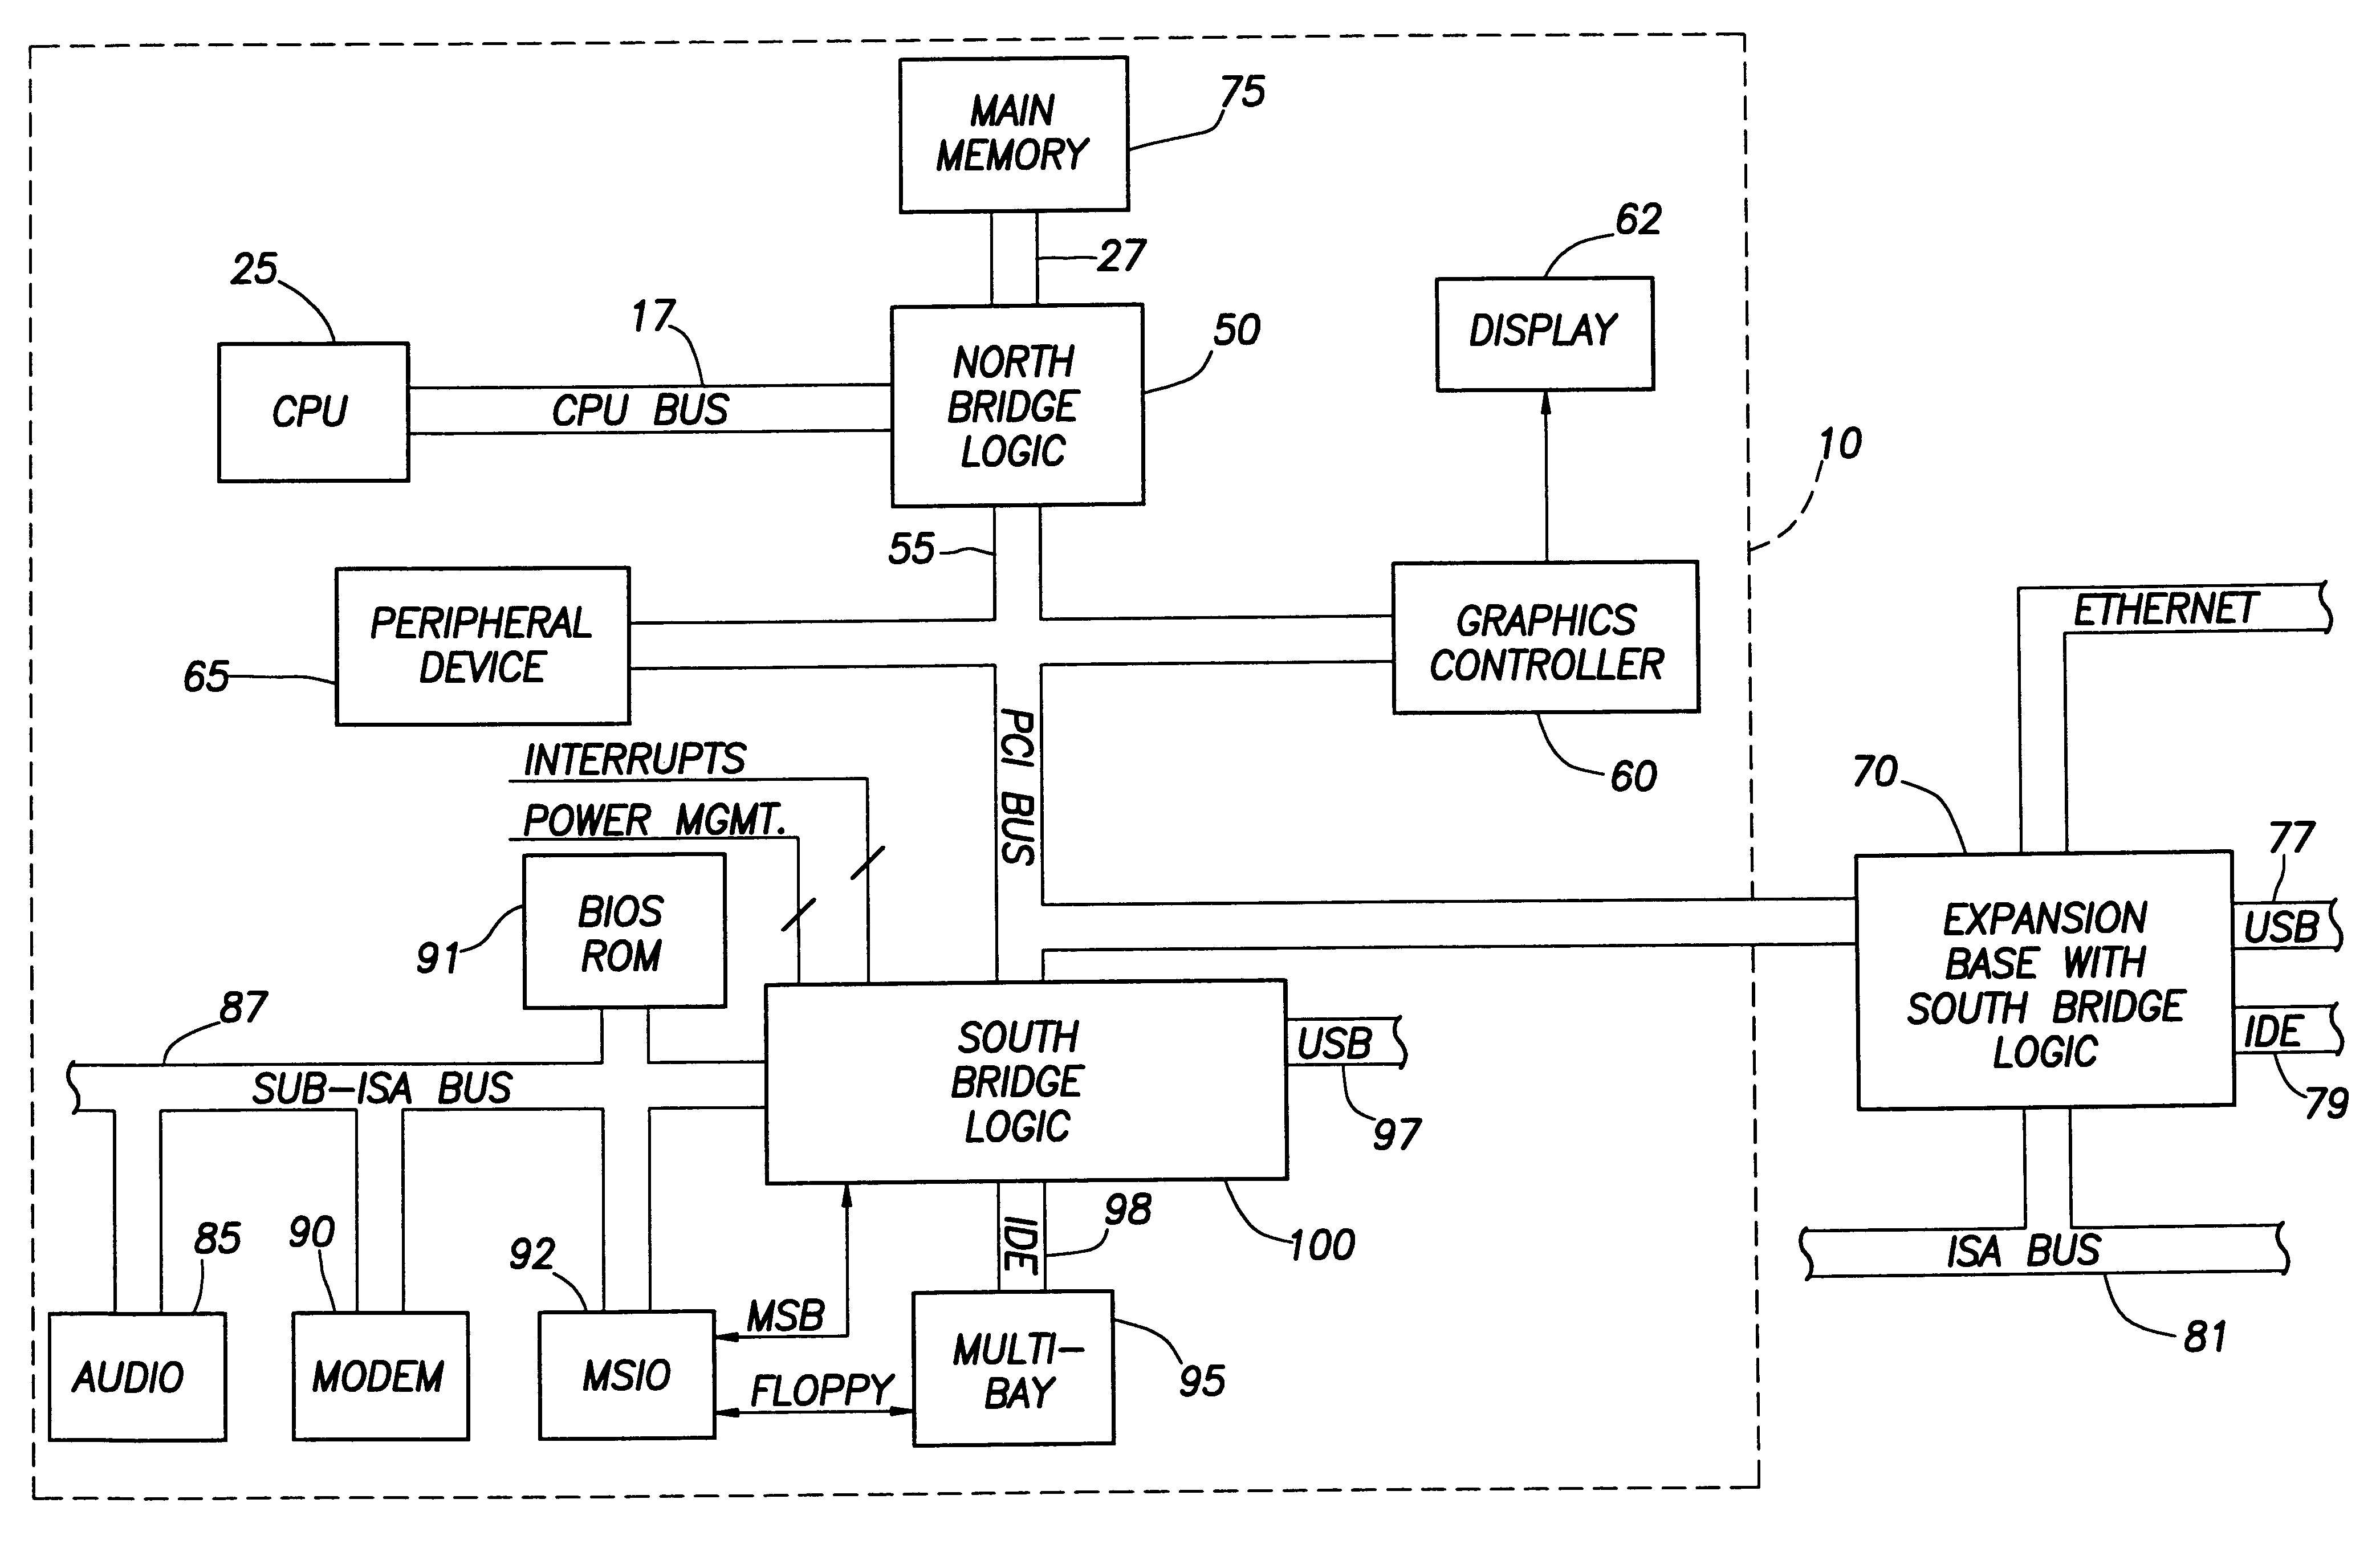 Computer system with bridge logic that asserts a system management interrupt signal when an address is made to a trapped address and which also completes the cycle to the target address